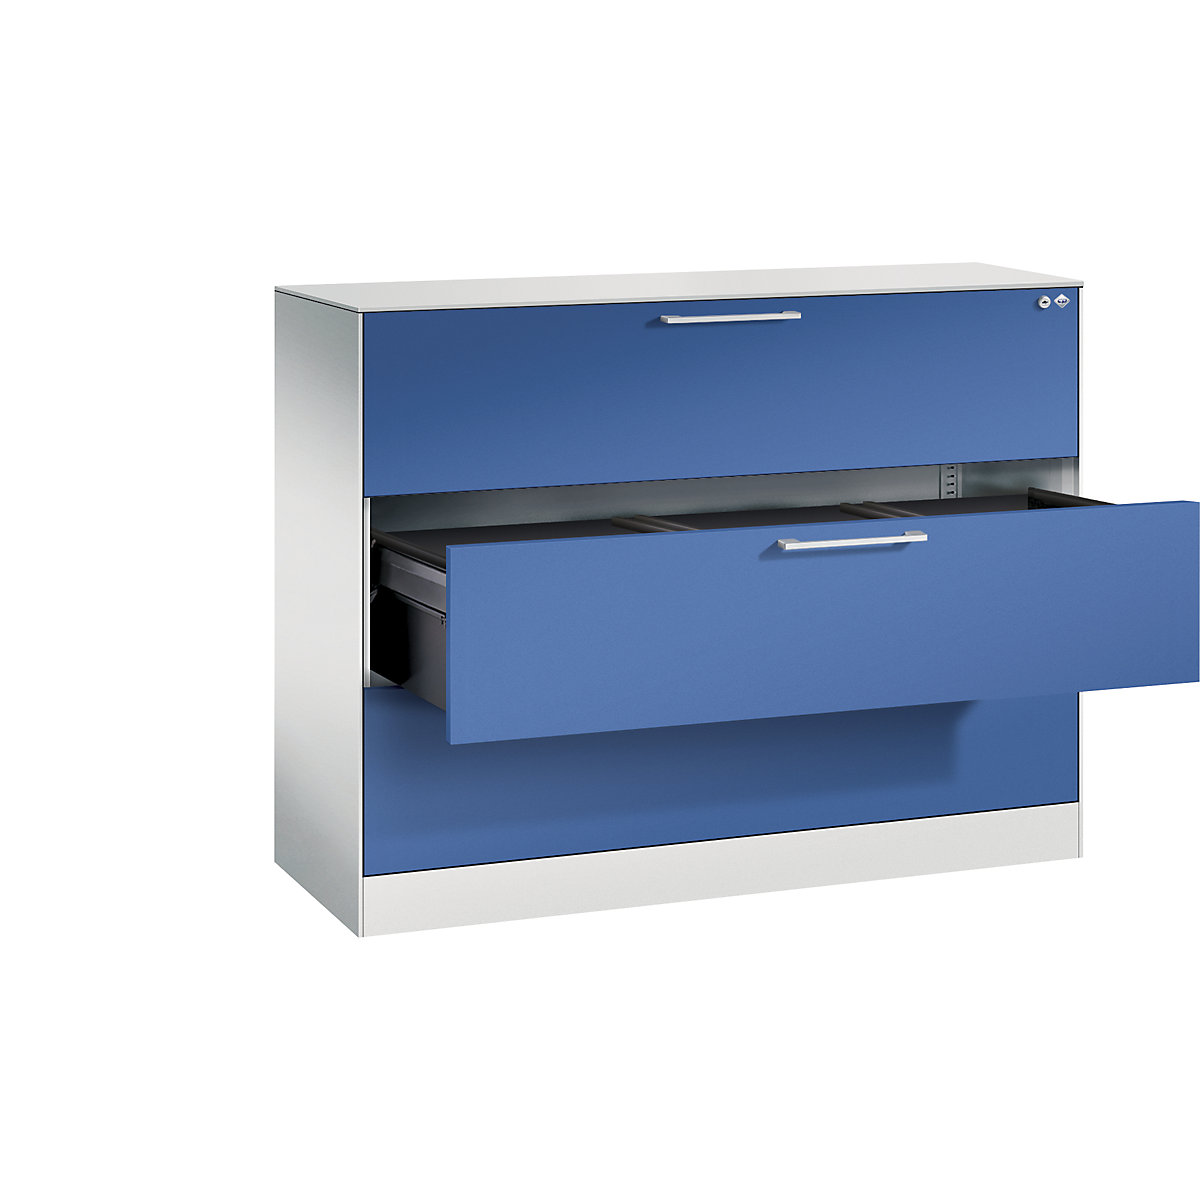 ASISTO suspension filing cabinet – C+P, width 1200 mm, with 3 drawers, light grey/gentian blue-20